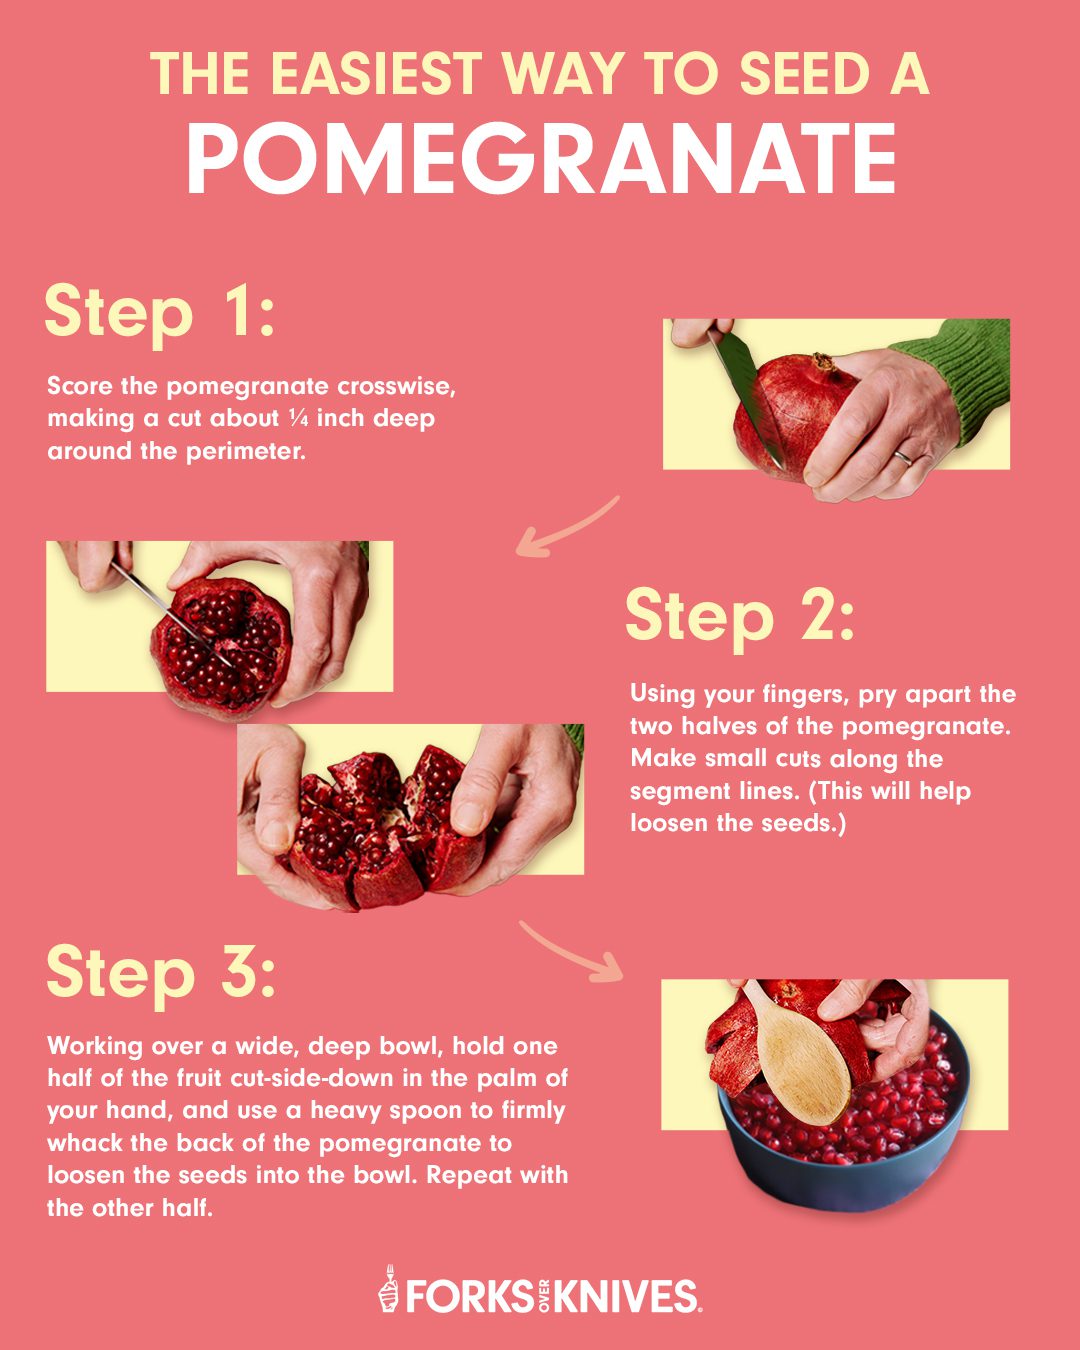 How to Seed a Pomegranate - Infographic showing how to seed a pomegranate in three steps